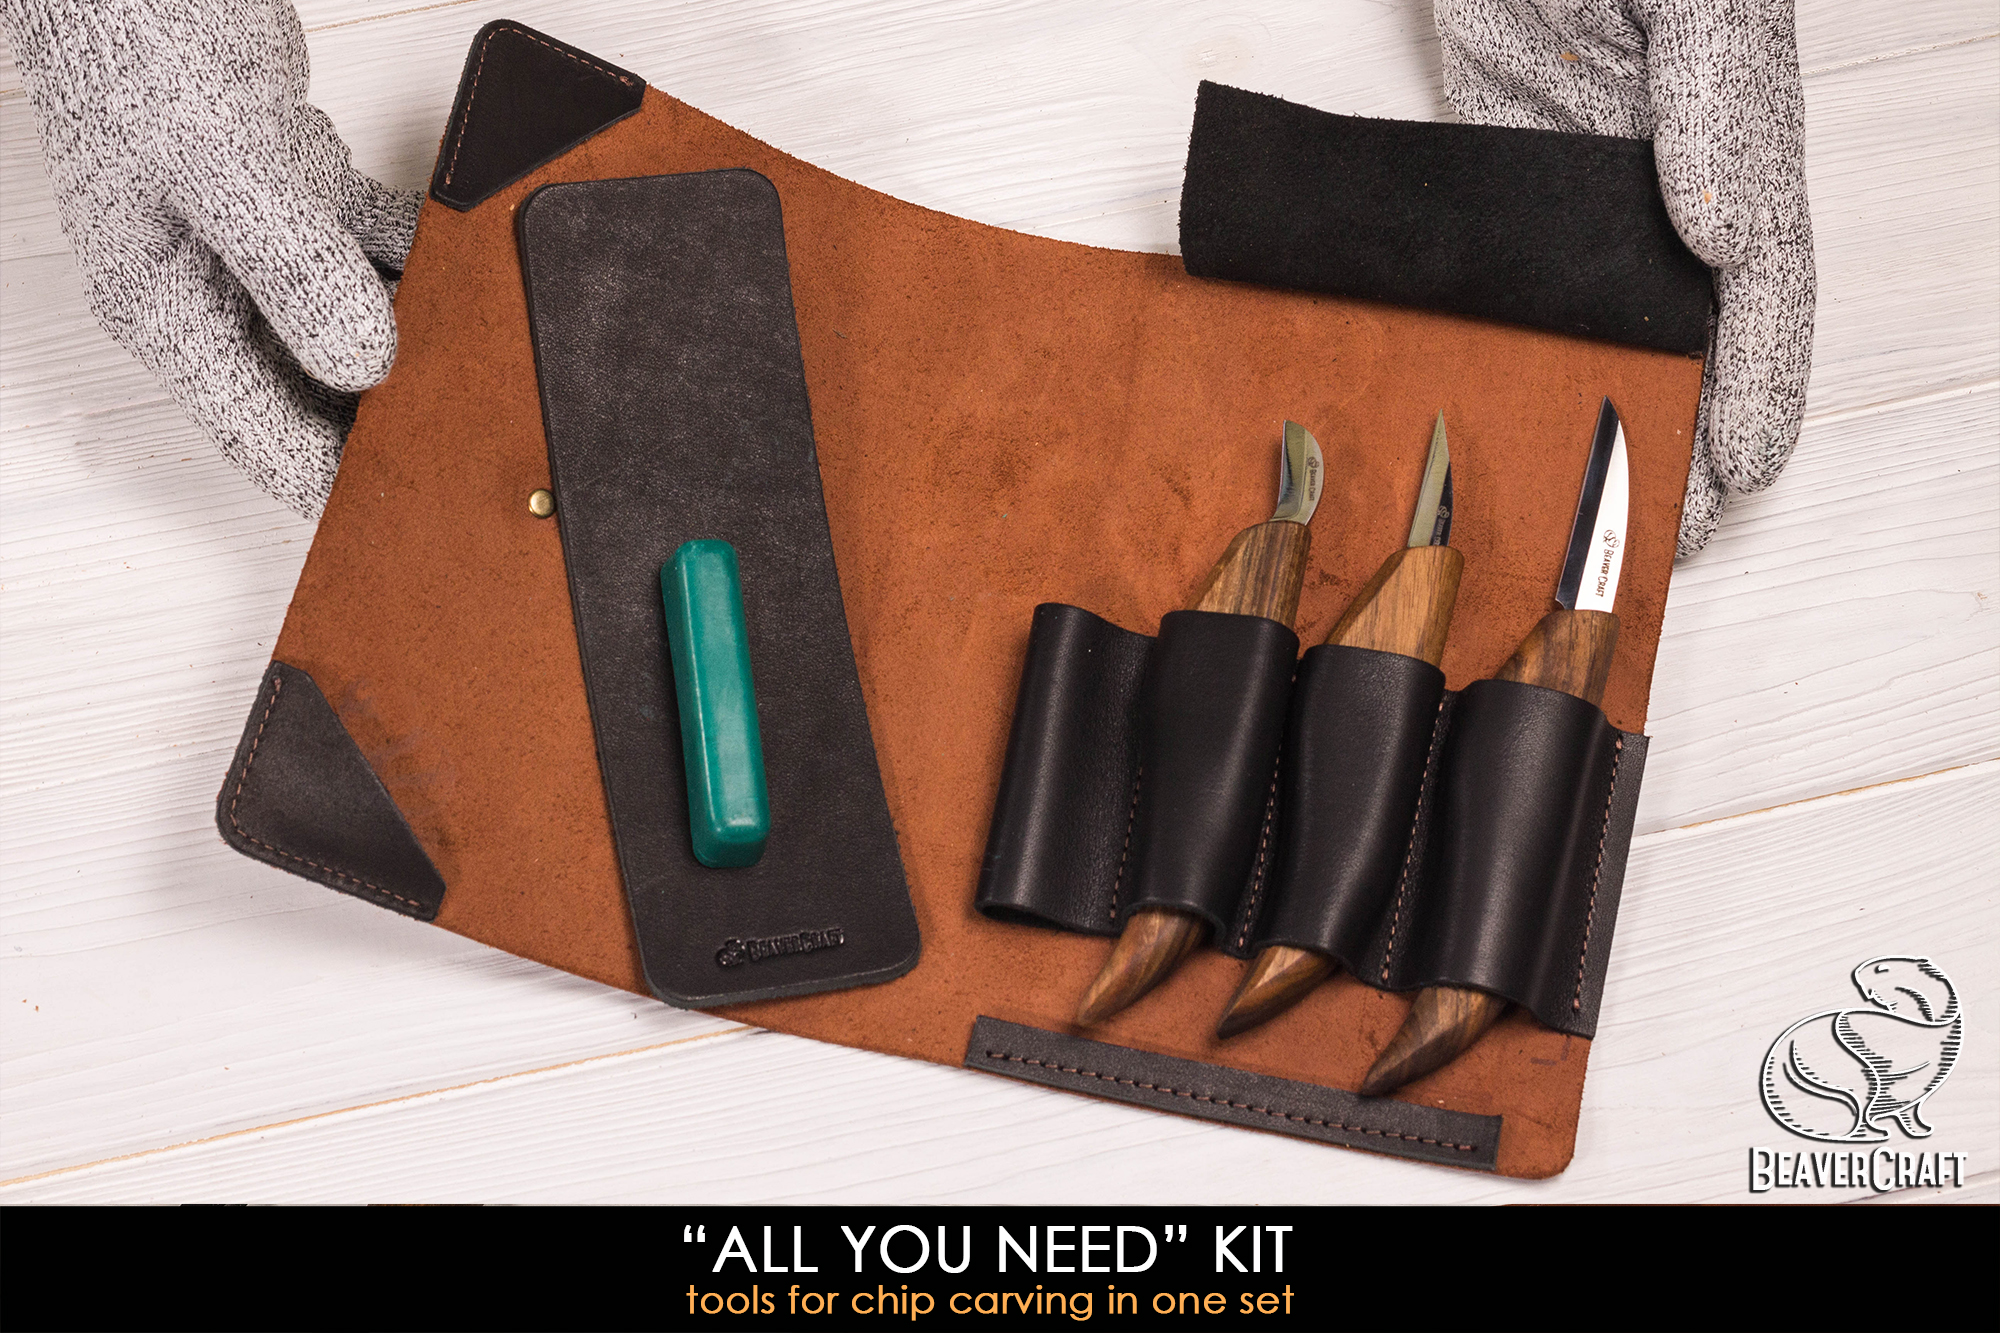 BeaverCraft Deluxe S15X Wood Carving Whittling Knives Set with Leather Case - Whittling Kit Premium Wood Carving Tools with Leather Strop and Polishi